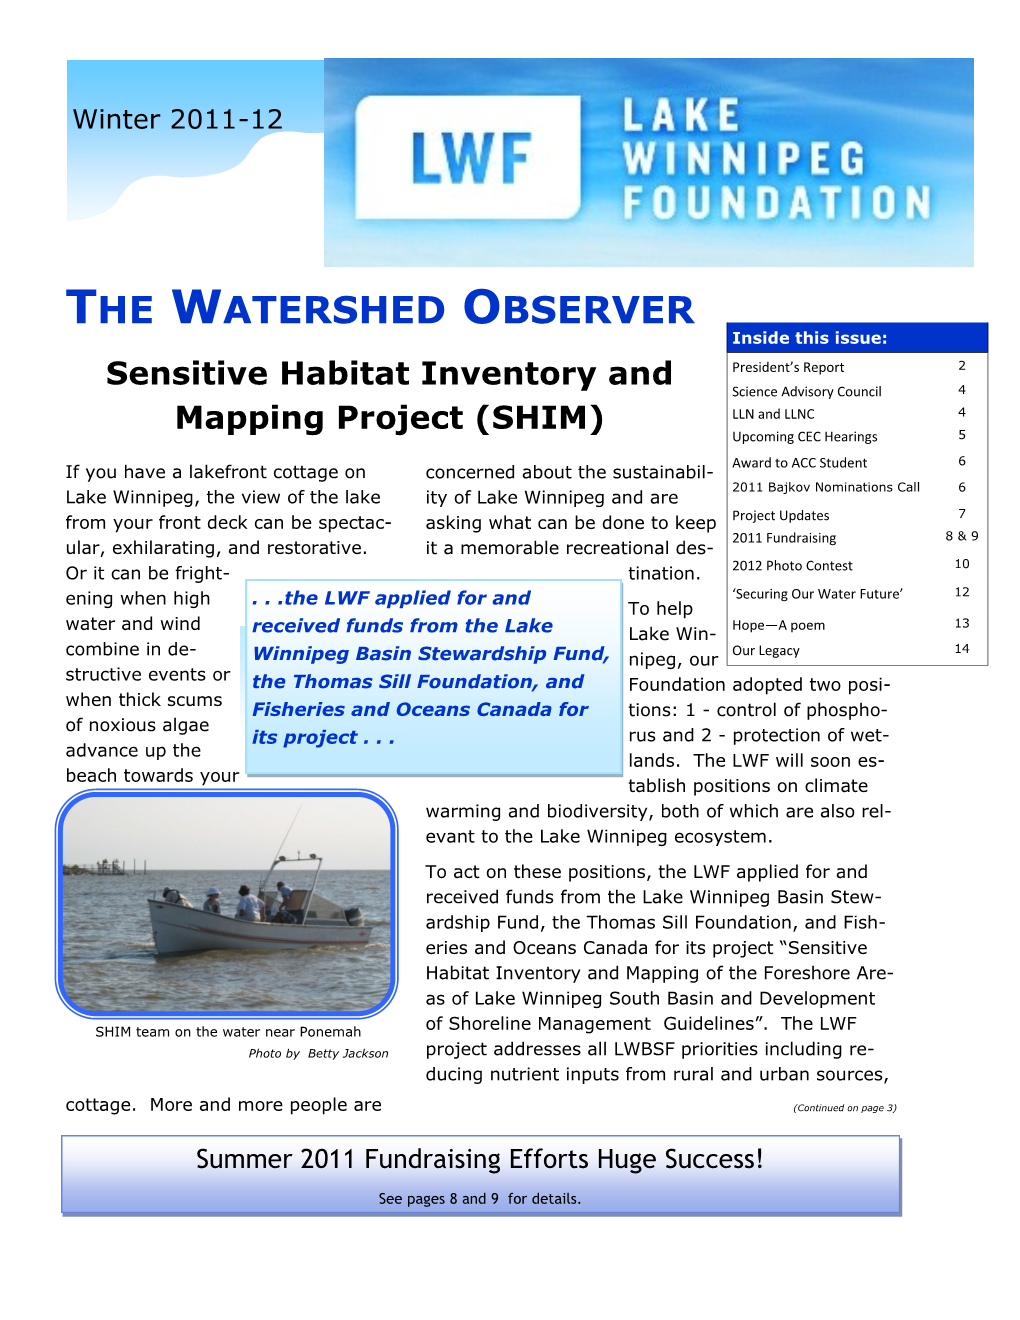 The Watershed Observer